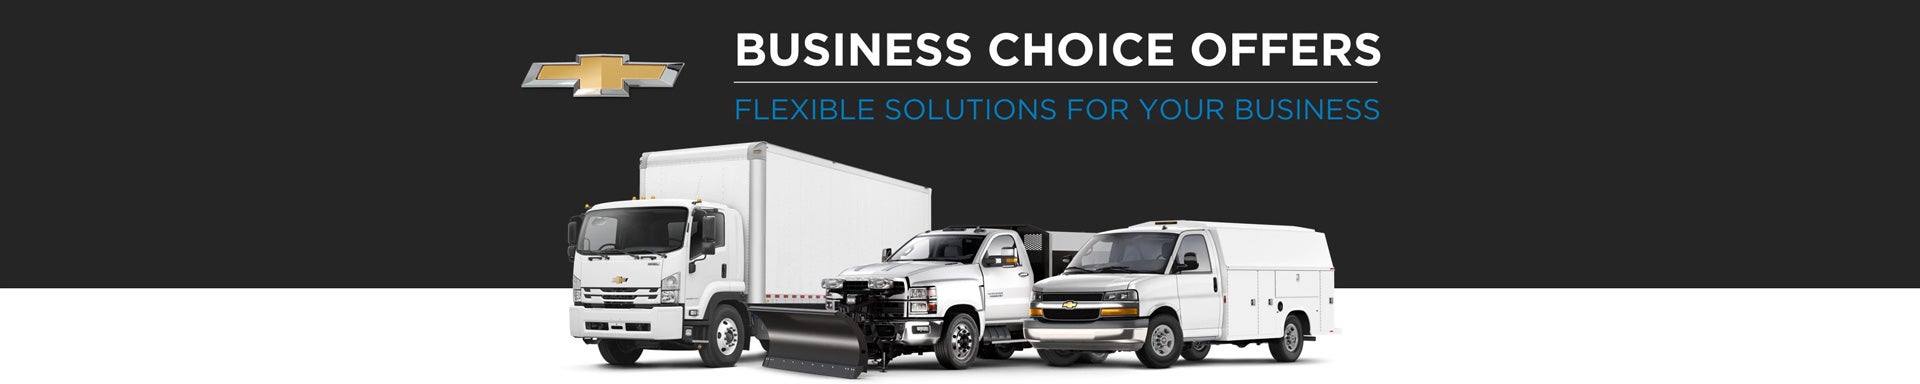 Chevrolet Business Choice Offers - Flexible Solutions for your Business - Ewald Chevrolet in Oconomowoc WI